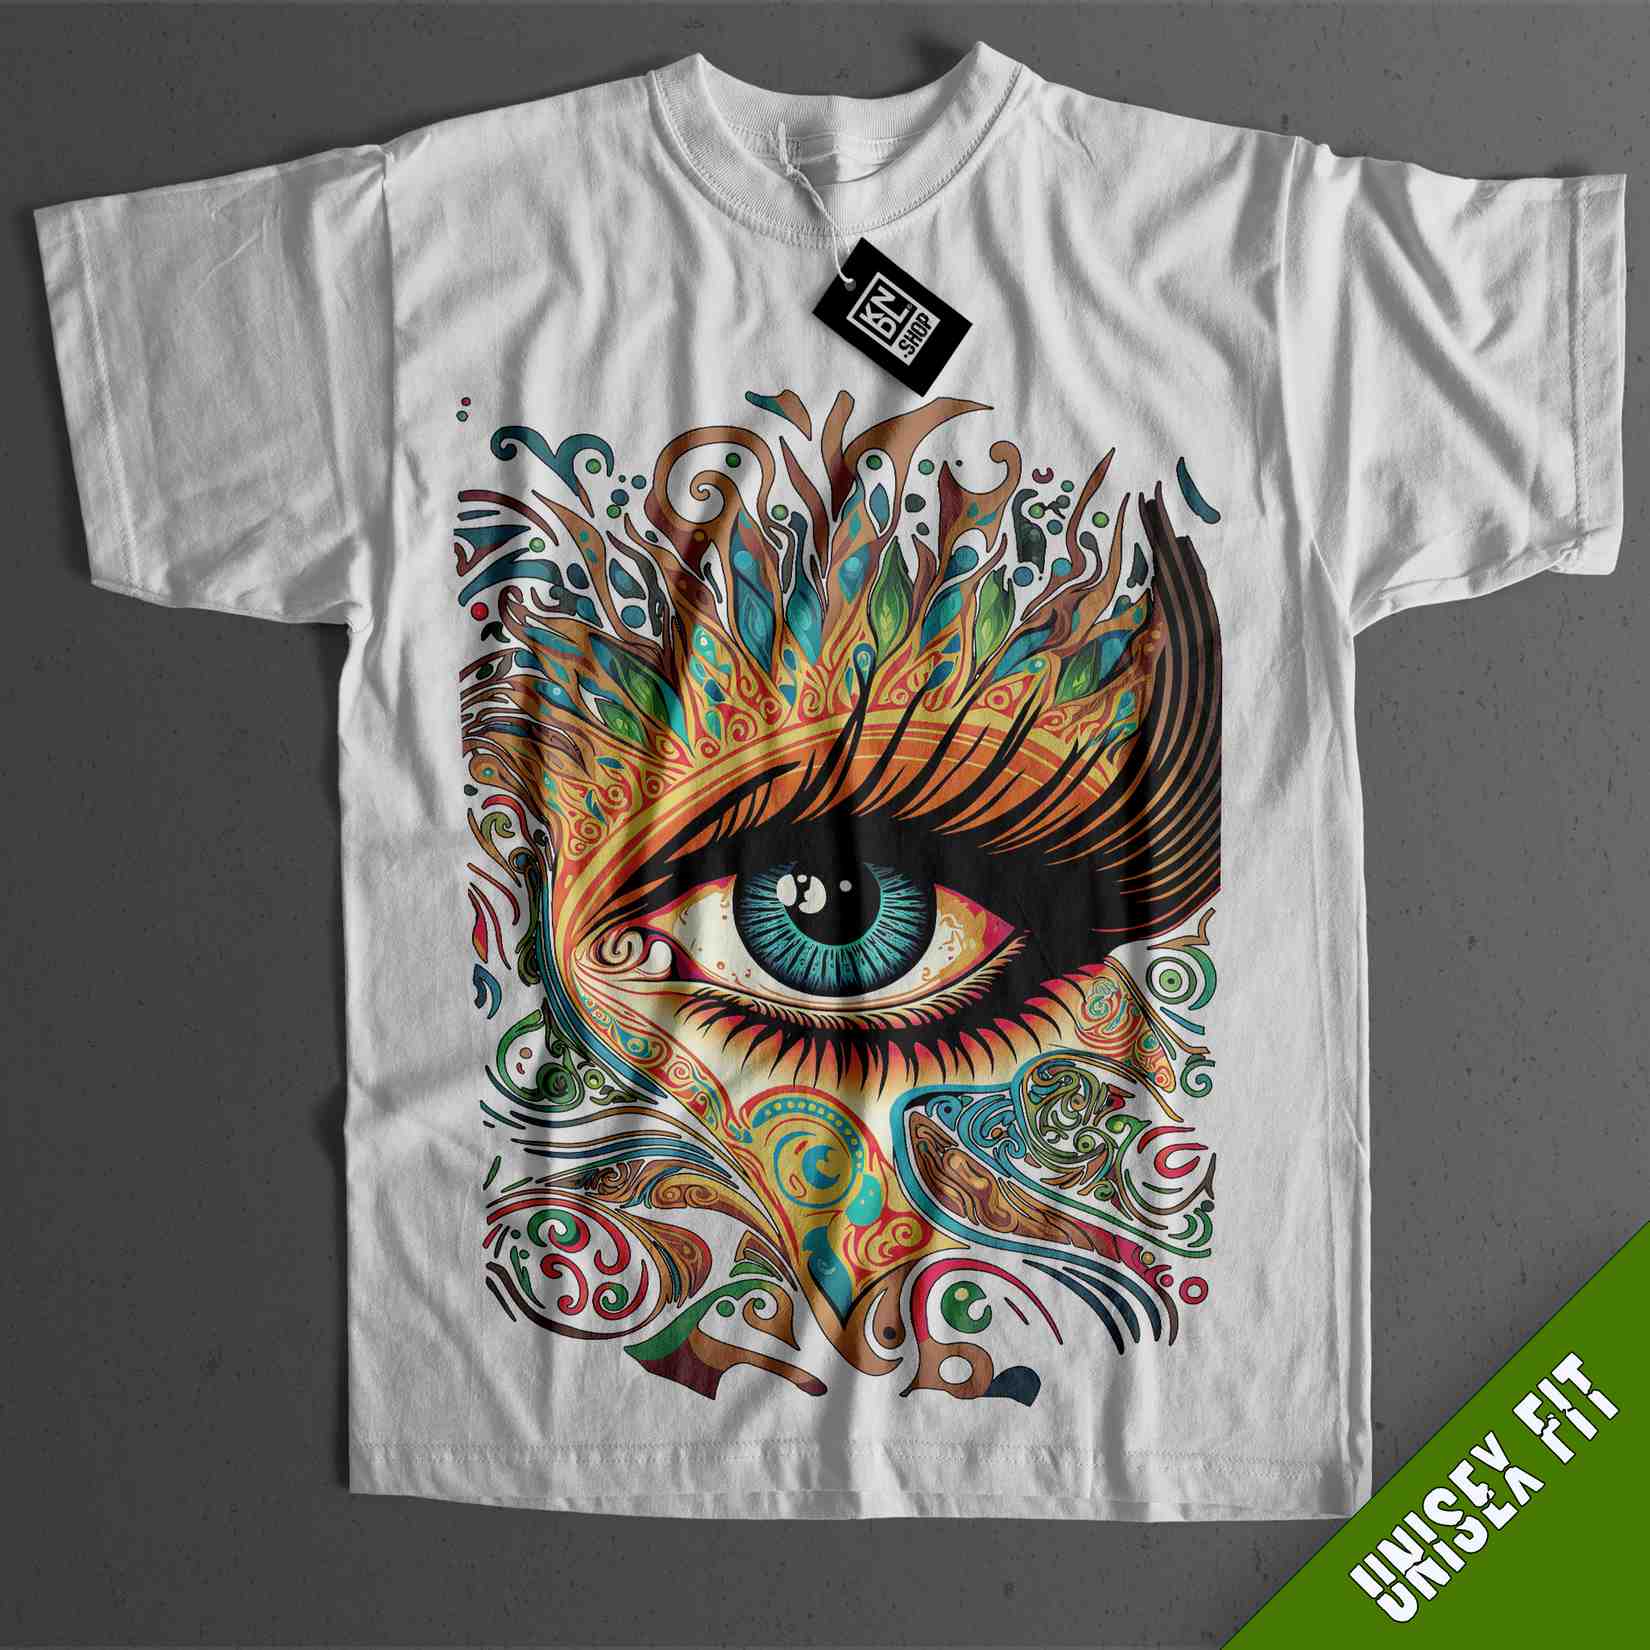 a t - shirt with an eye on it